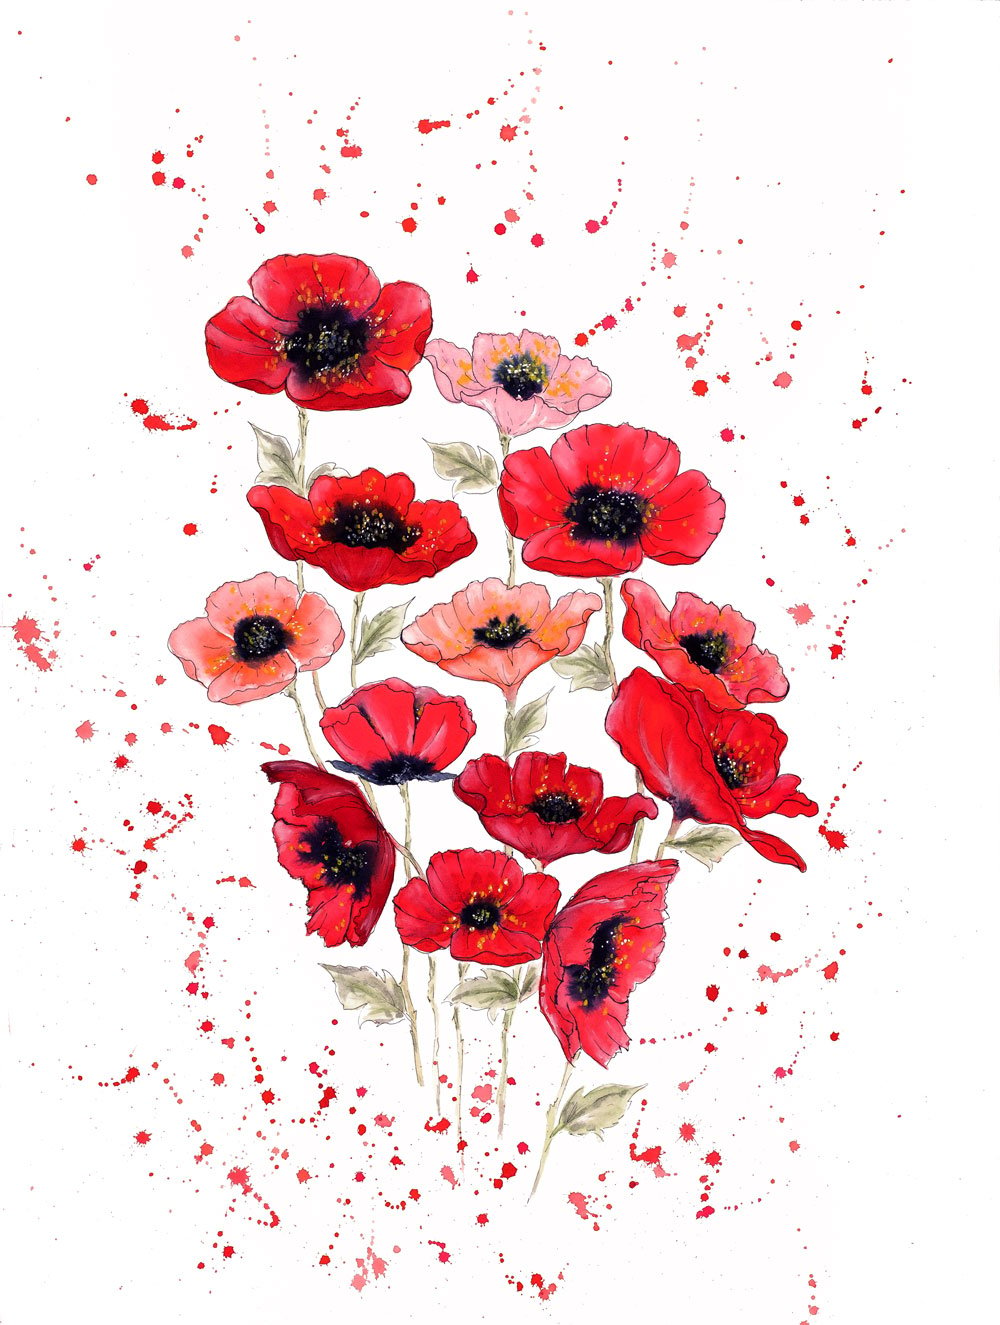 Image of "Poppy Bouquet" - From The CountryLife Collection